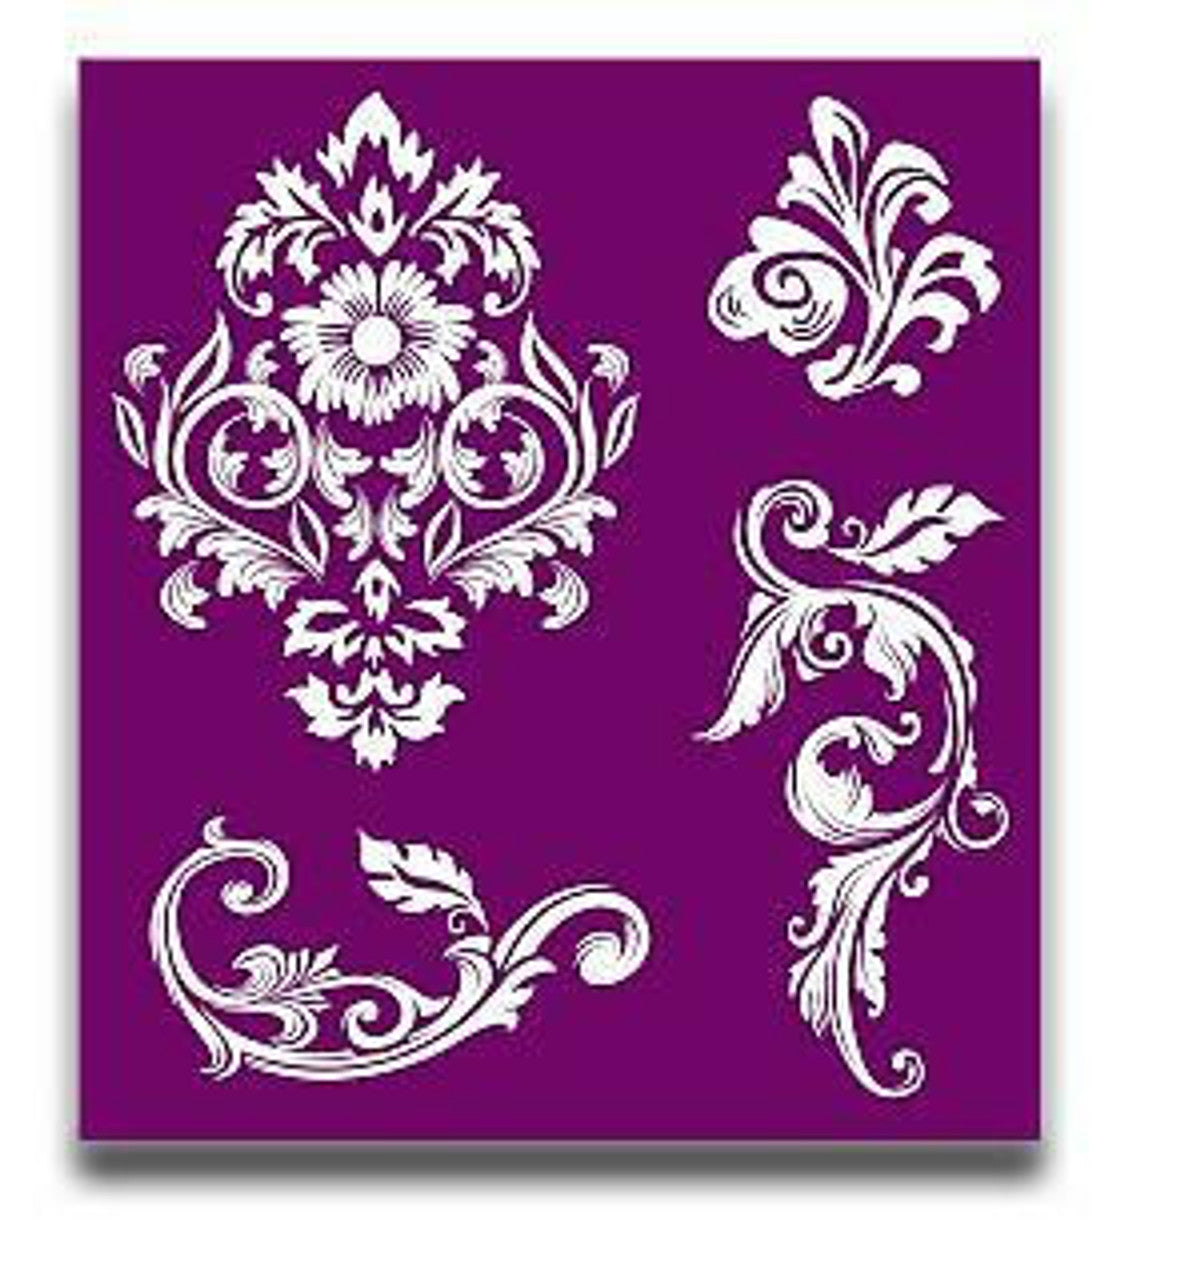 FLORAL Silk Screen Stencils 3 designs 8" x 10" by Belles and Whistles